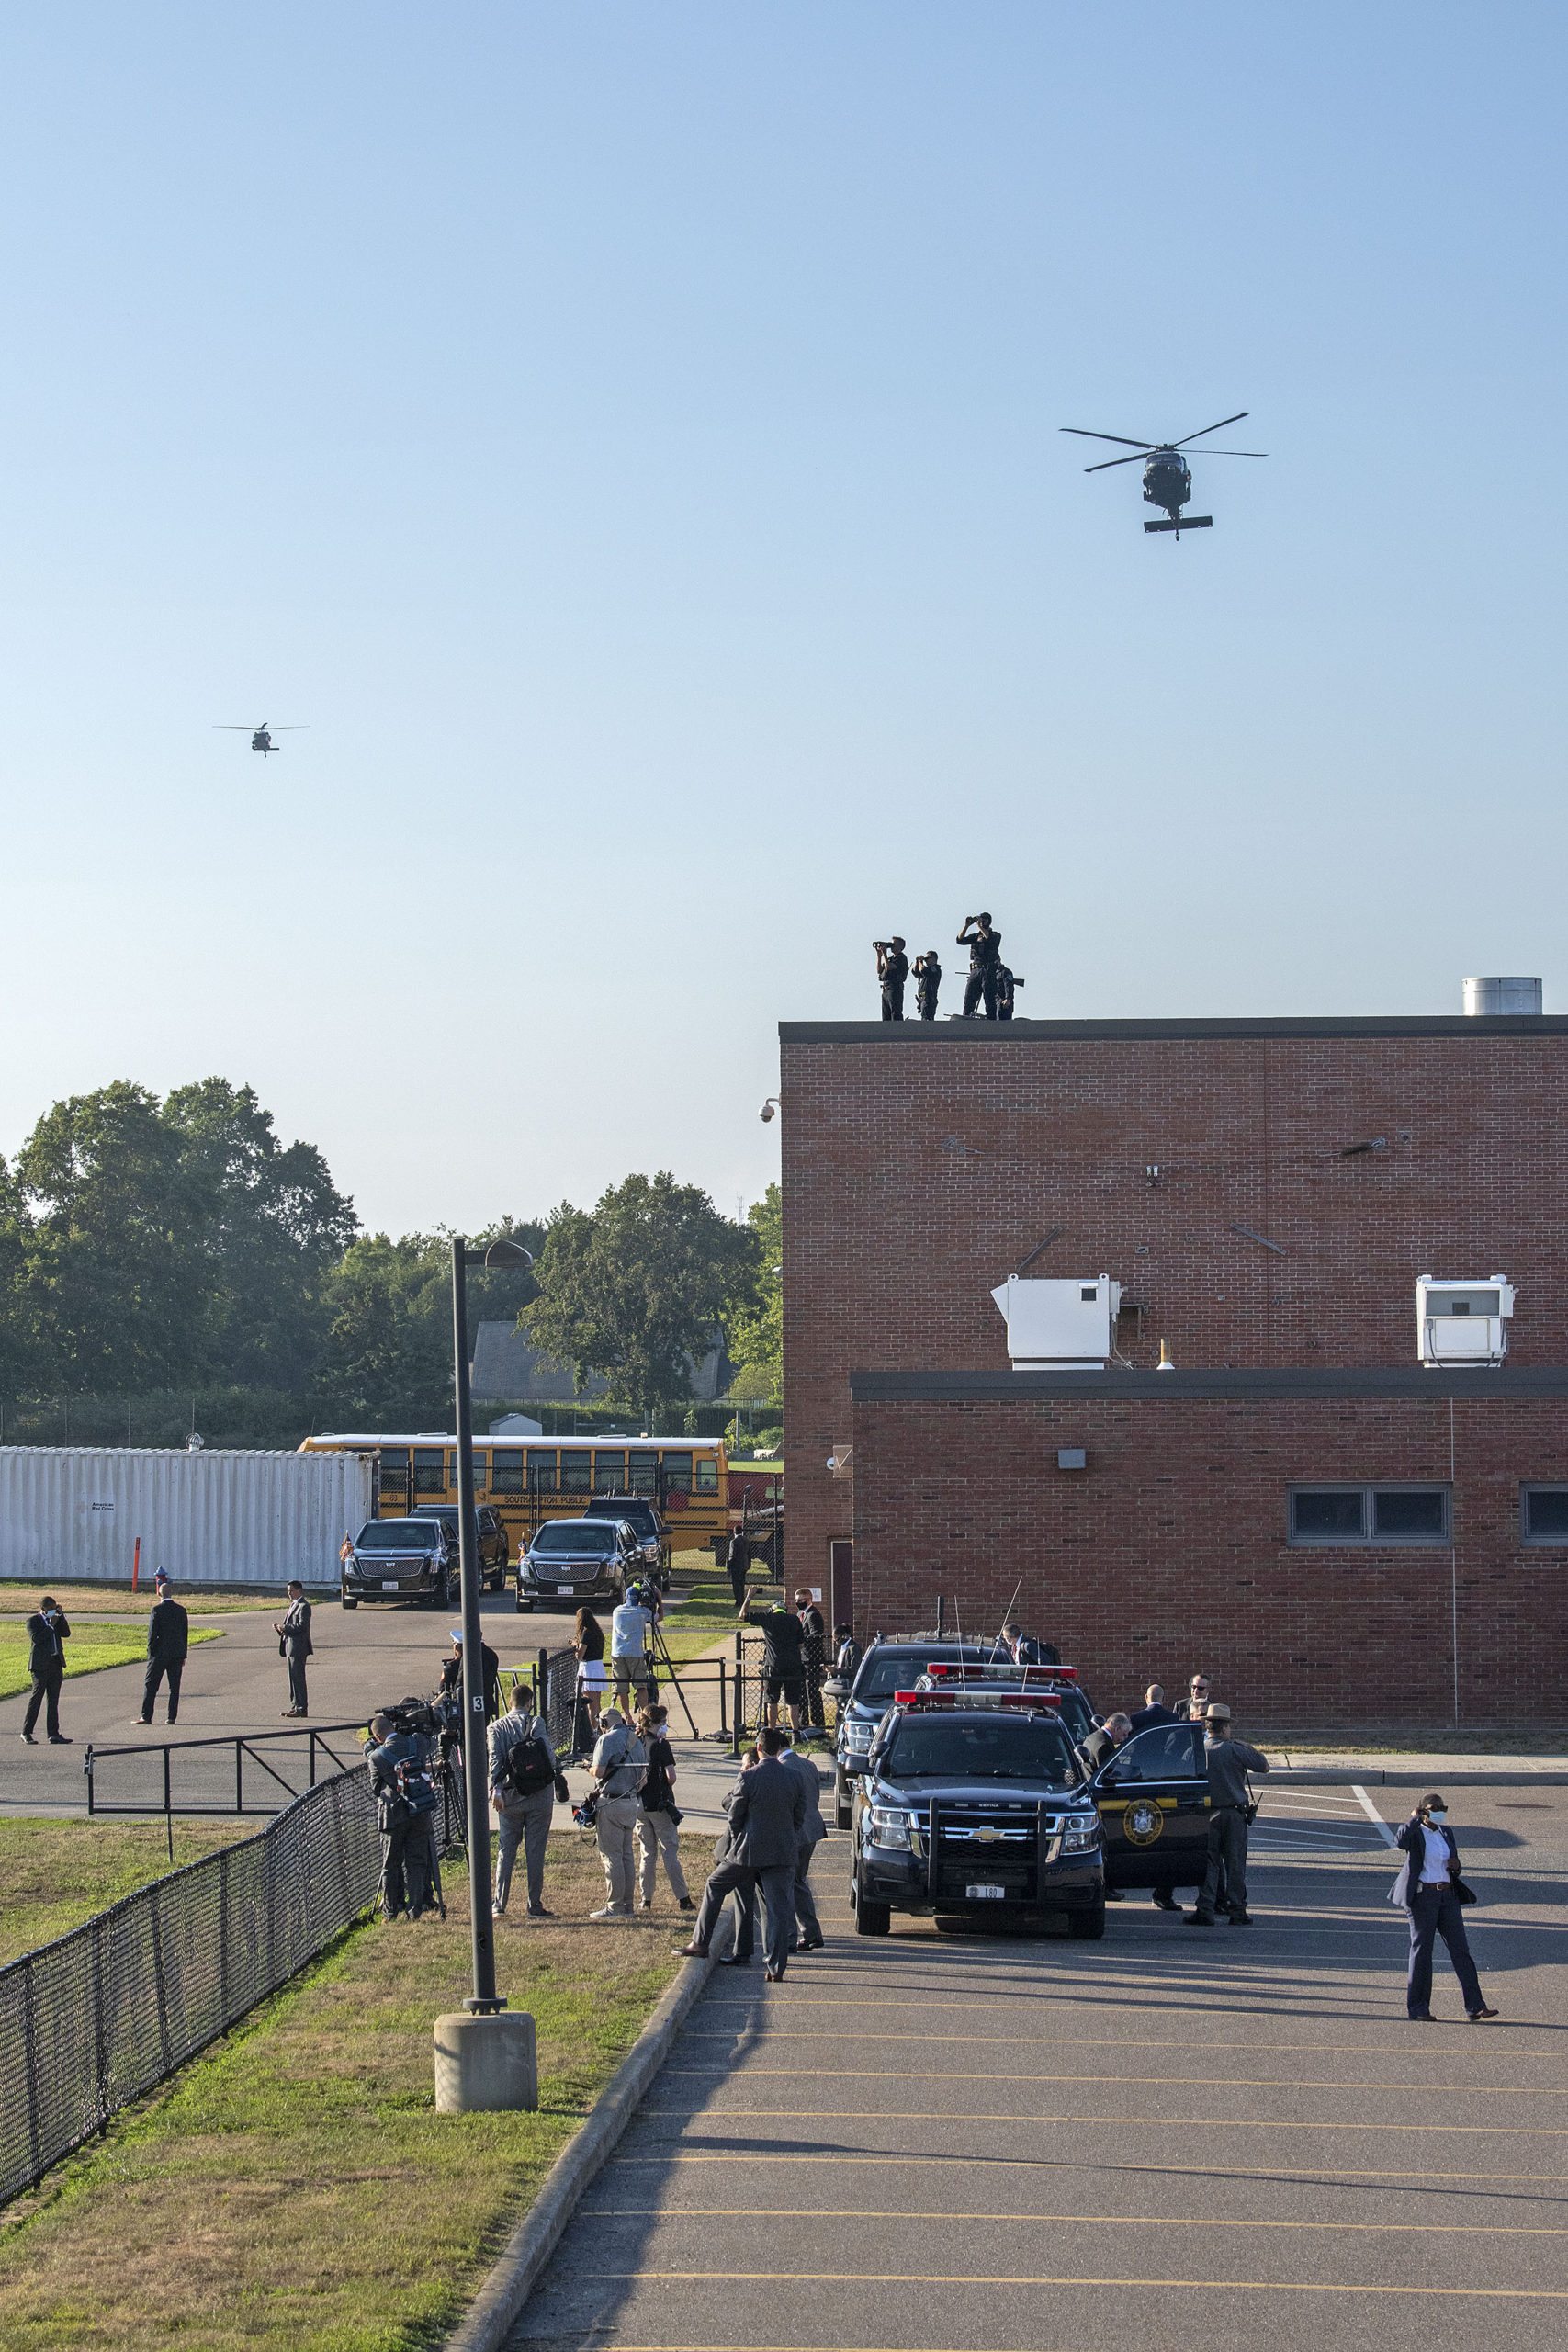 The presidential motorcade awaits as helicopters approach for a landing. Members of the Southampton Fire Department went on standby to provide fire protection as President Donald Trump arrived at the athletic fields behind Southampton High School during his visit to the Hamptons on Saturday.    MICHAEL HELLER